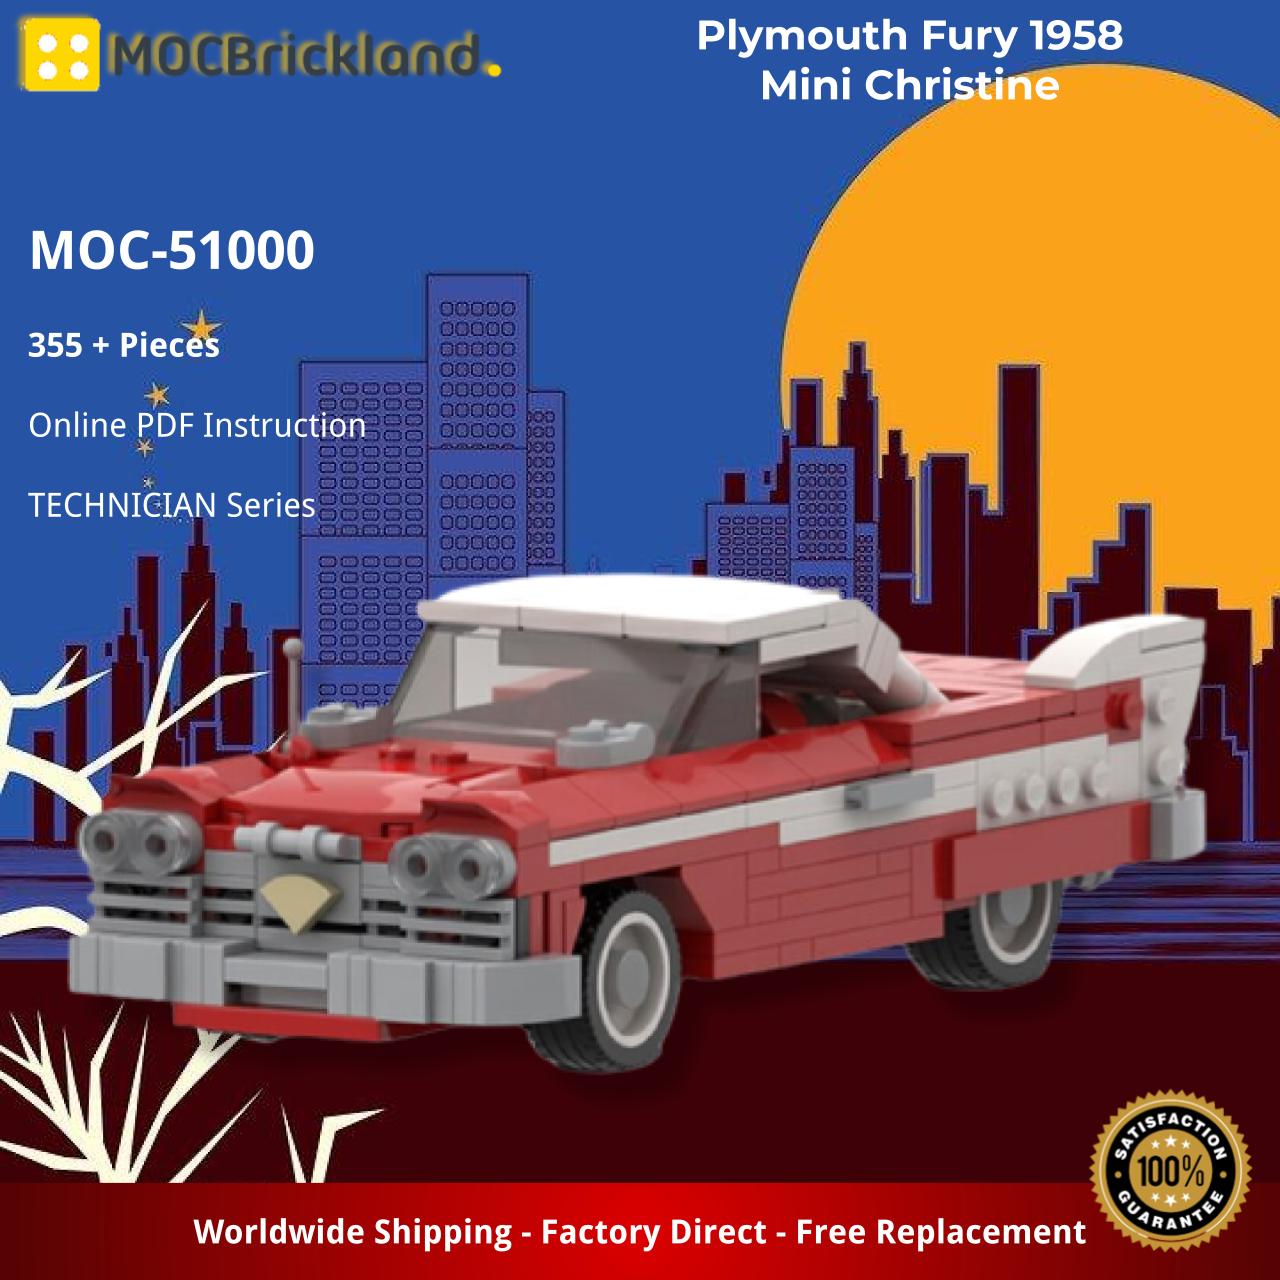 Plymouth Fury 1958 Mini Christine TECHNICIAN MOC-51000 by AngryBricksPL with 355 pieces